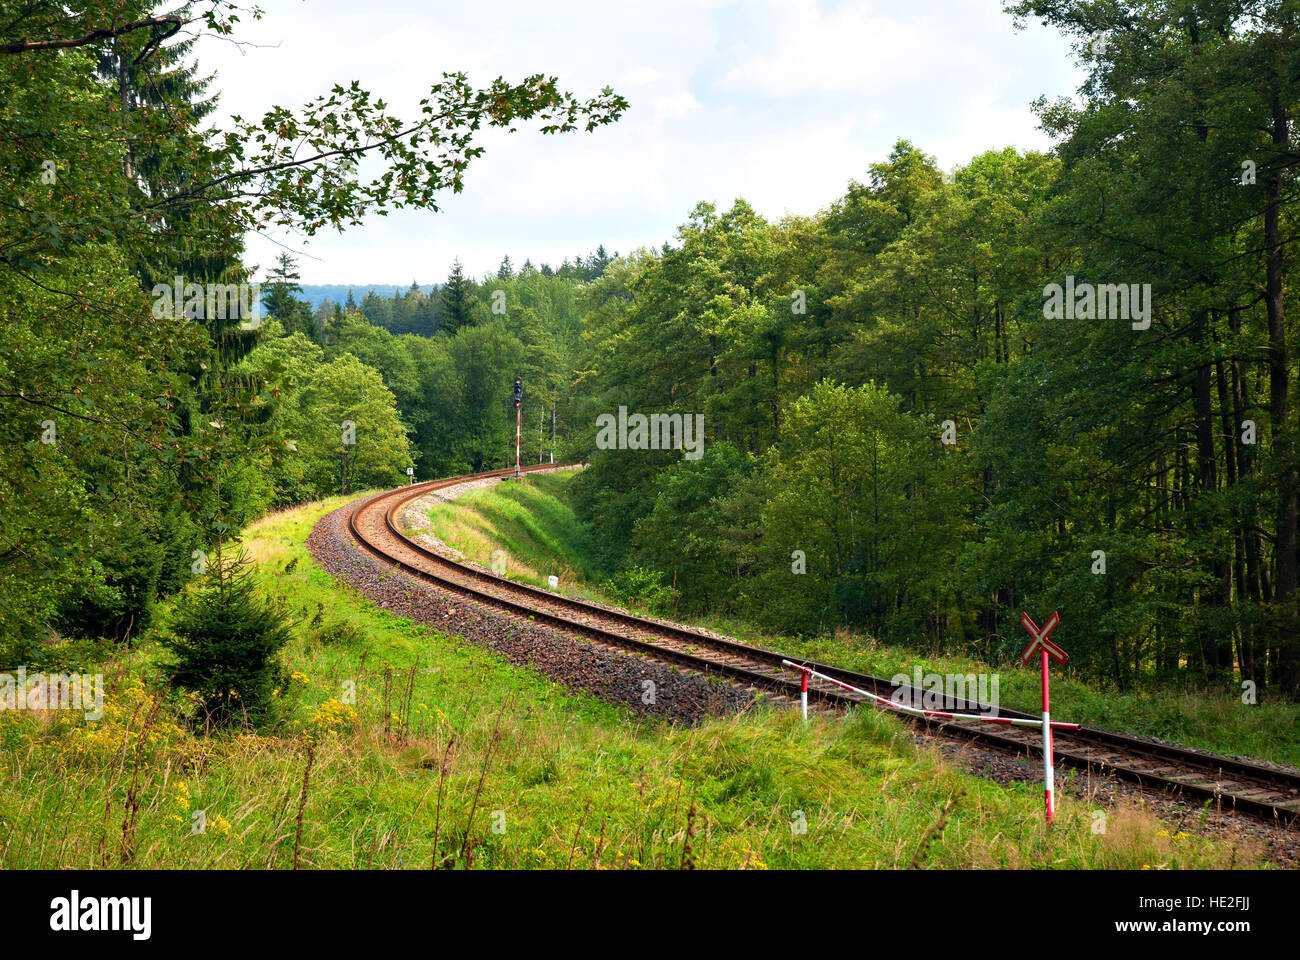 Czech Railway Semaphore Signal High Resolution Stock Photography and Images  - Alamy